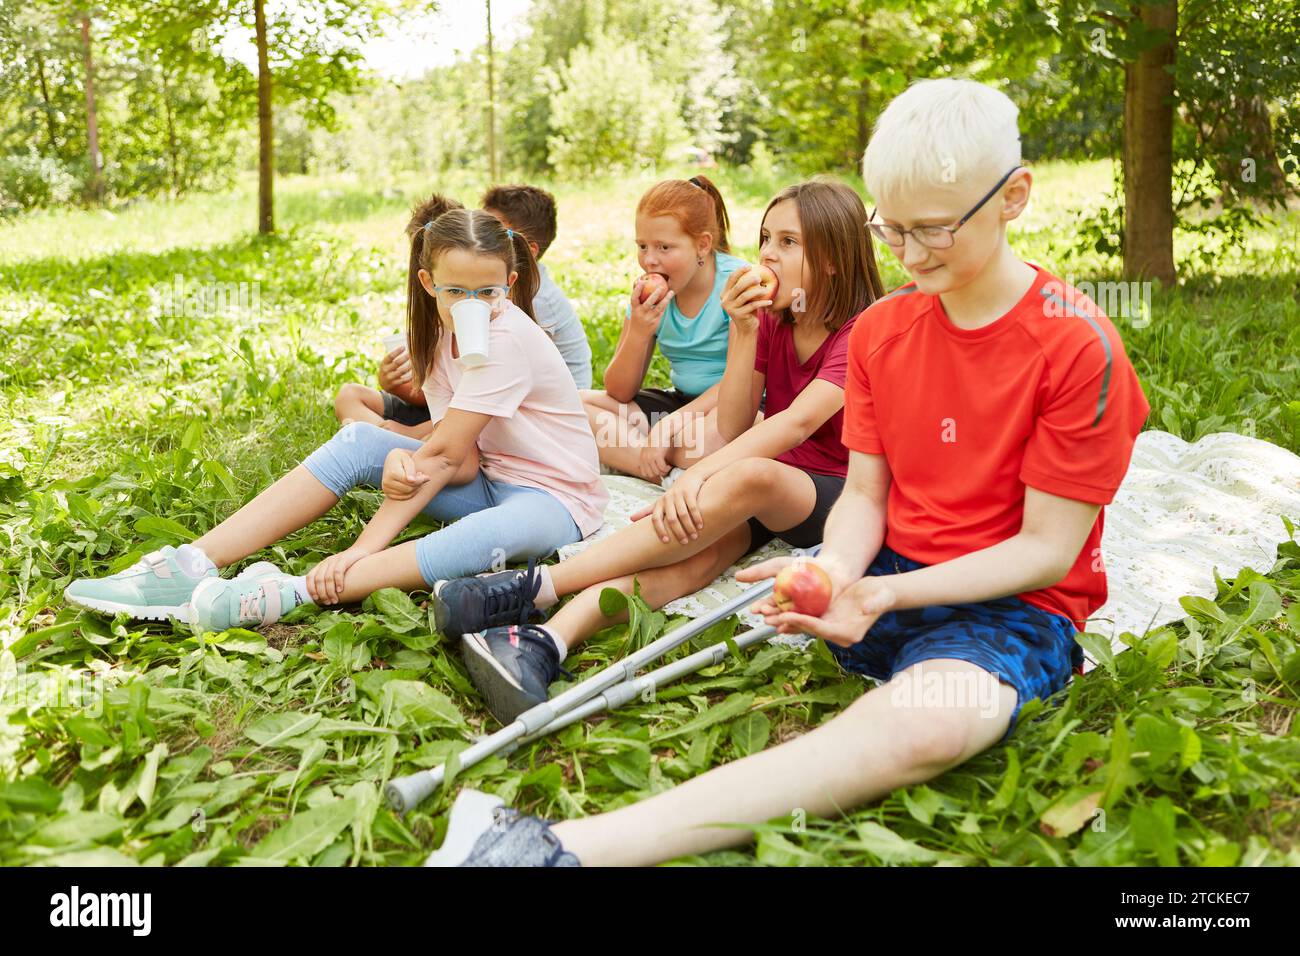 Handicapped boy holding apple sitting with friends on blanket at park Stock Photo